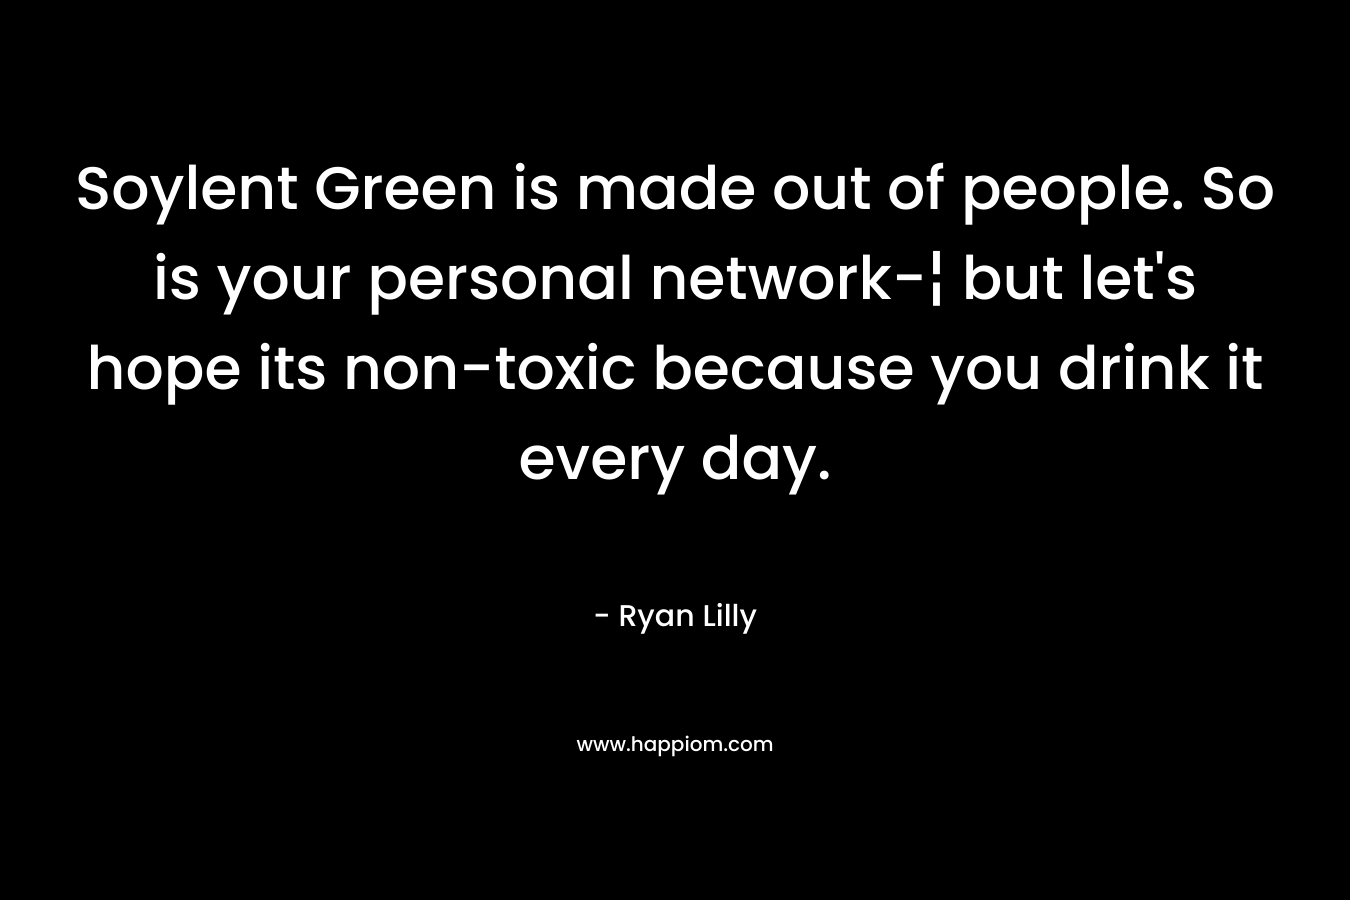 Soylent Green is made out of people. So is your personal network-¦ but let's hope its non-toxic because you drink it every day.